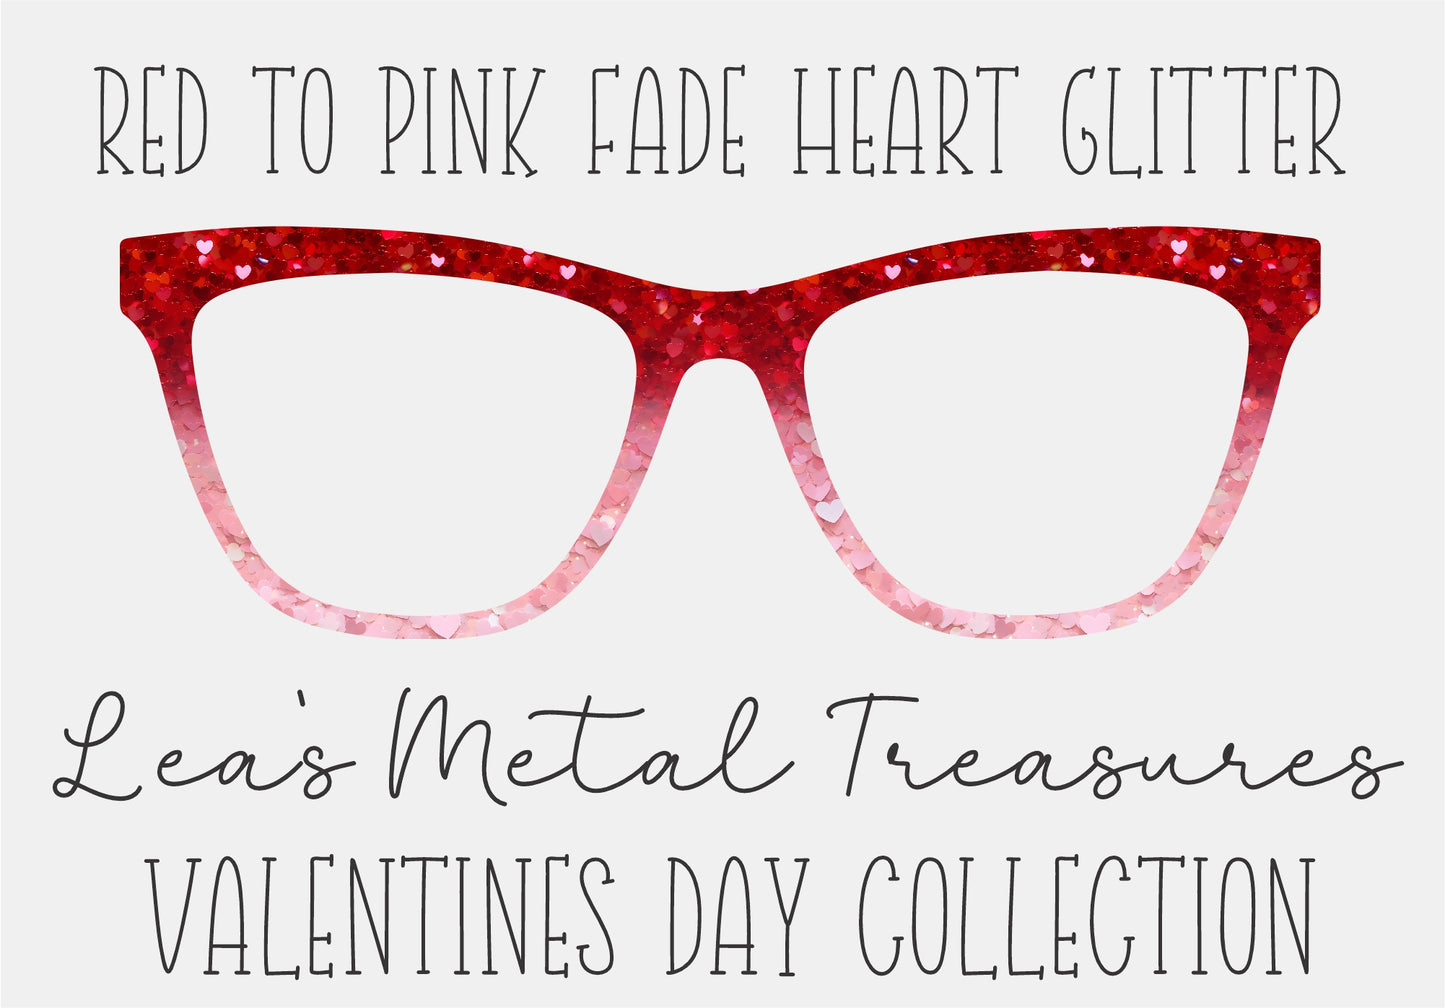 Red to Pink Fade Heart Glitter Eyewear Frame Toppers COMES WITH MAGNETS